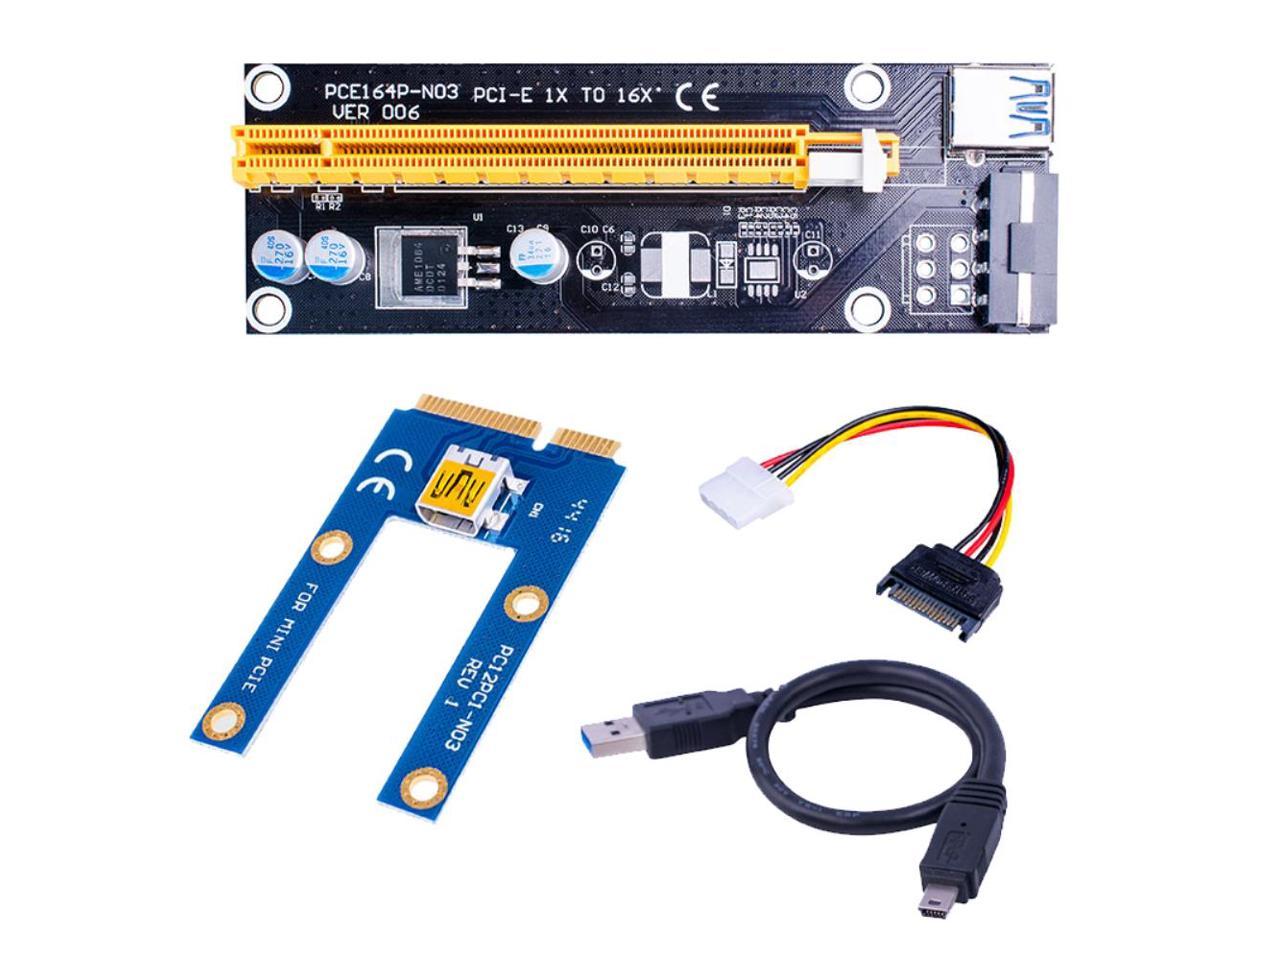 Mini PCIe 1x to PCI Express x16 Riser Card for Laptop ...